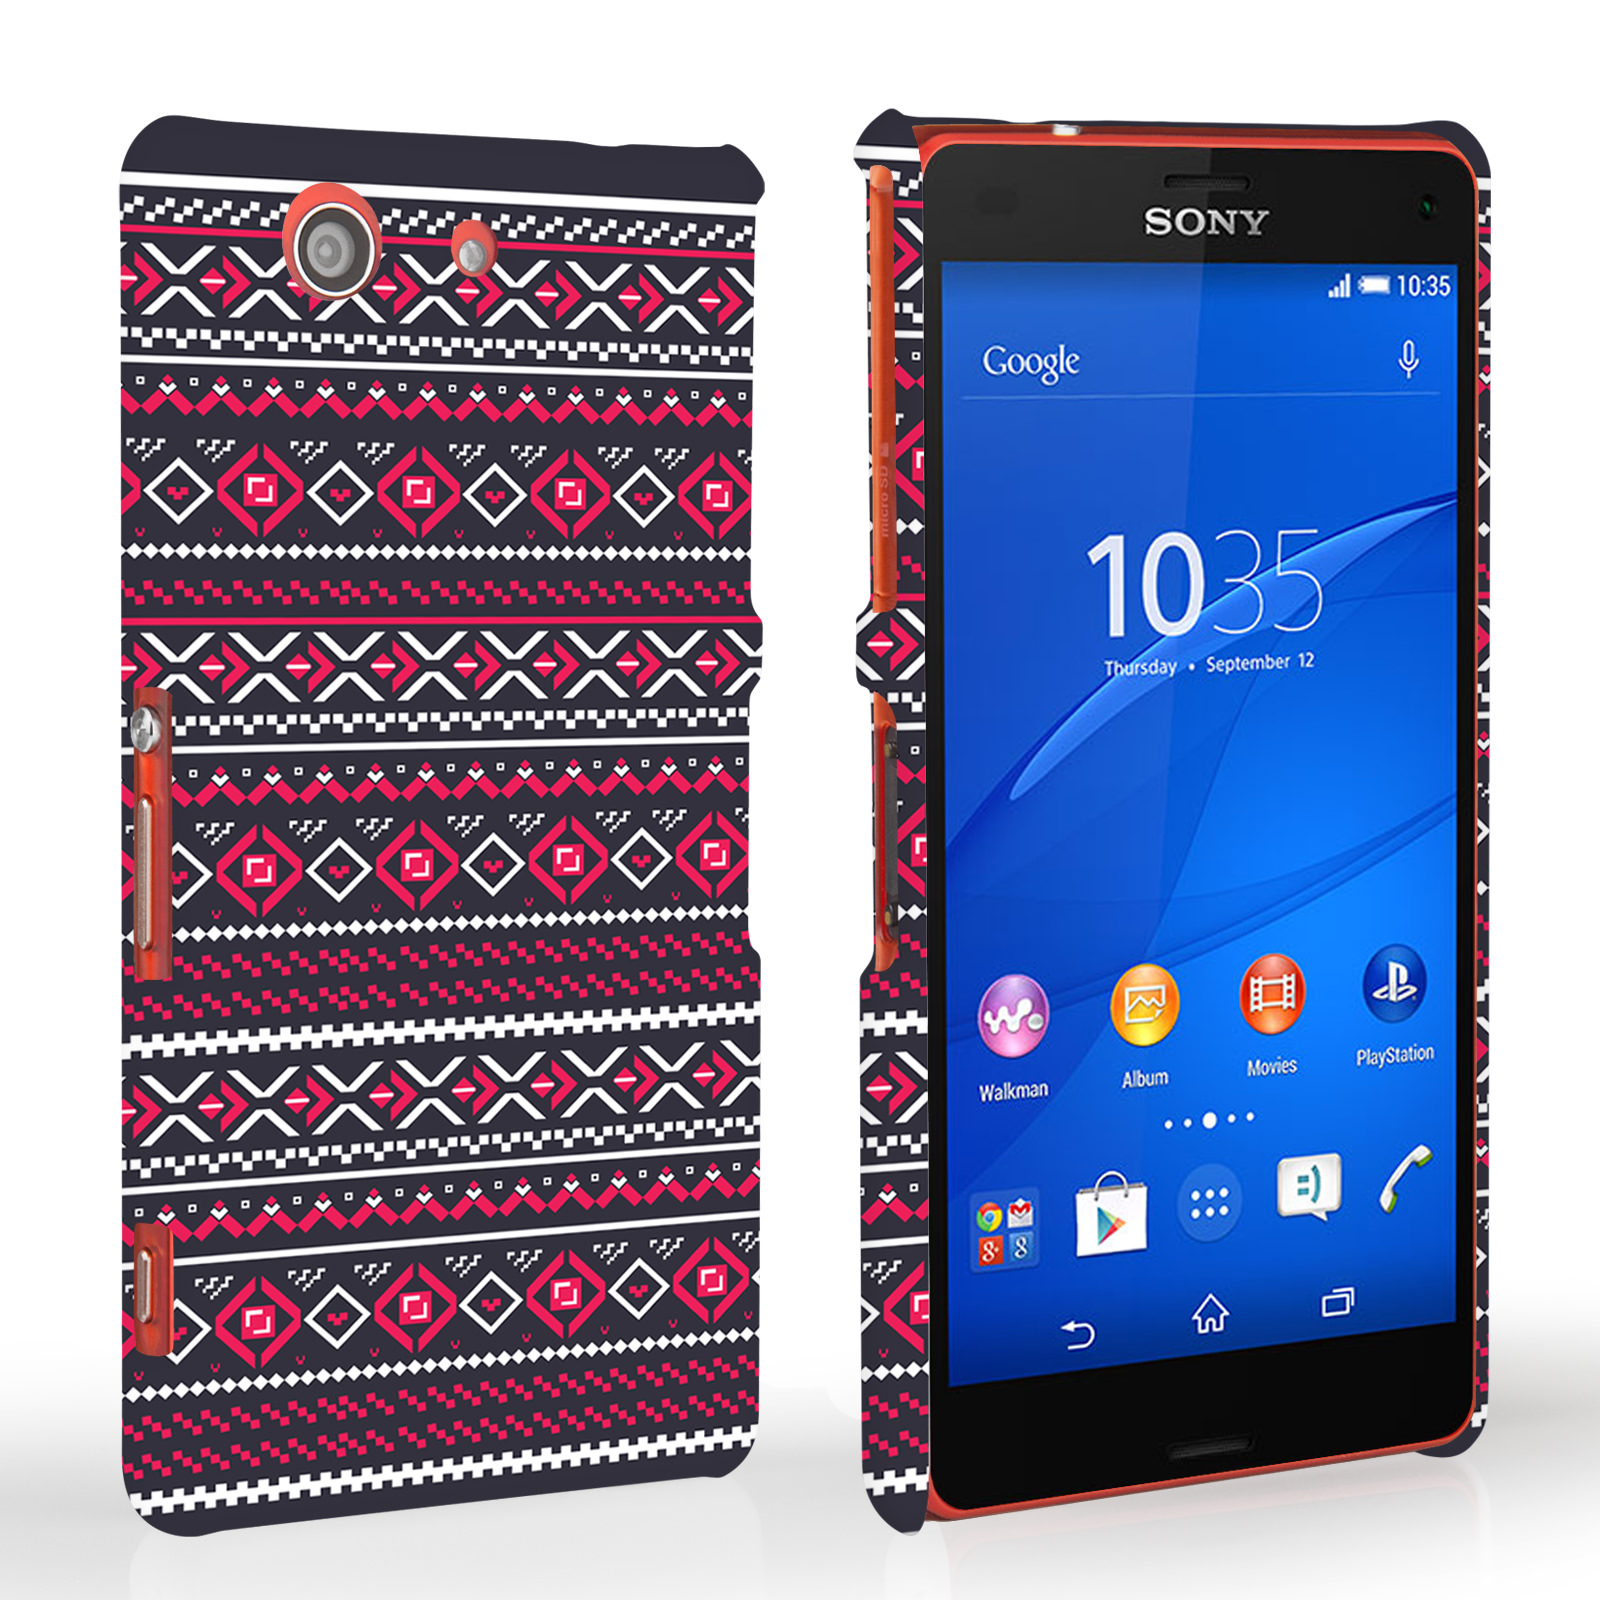 Caseflex Sony Xperia Z3 Compact Fairisle Case – Grey with Red Background